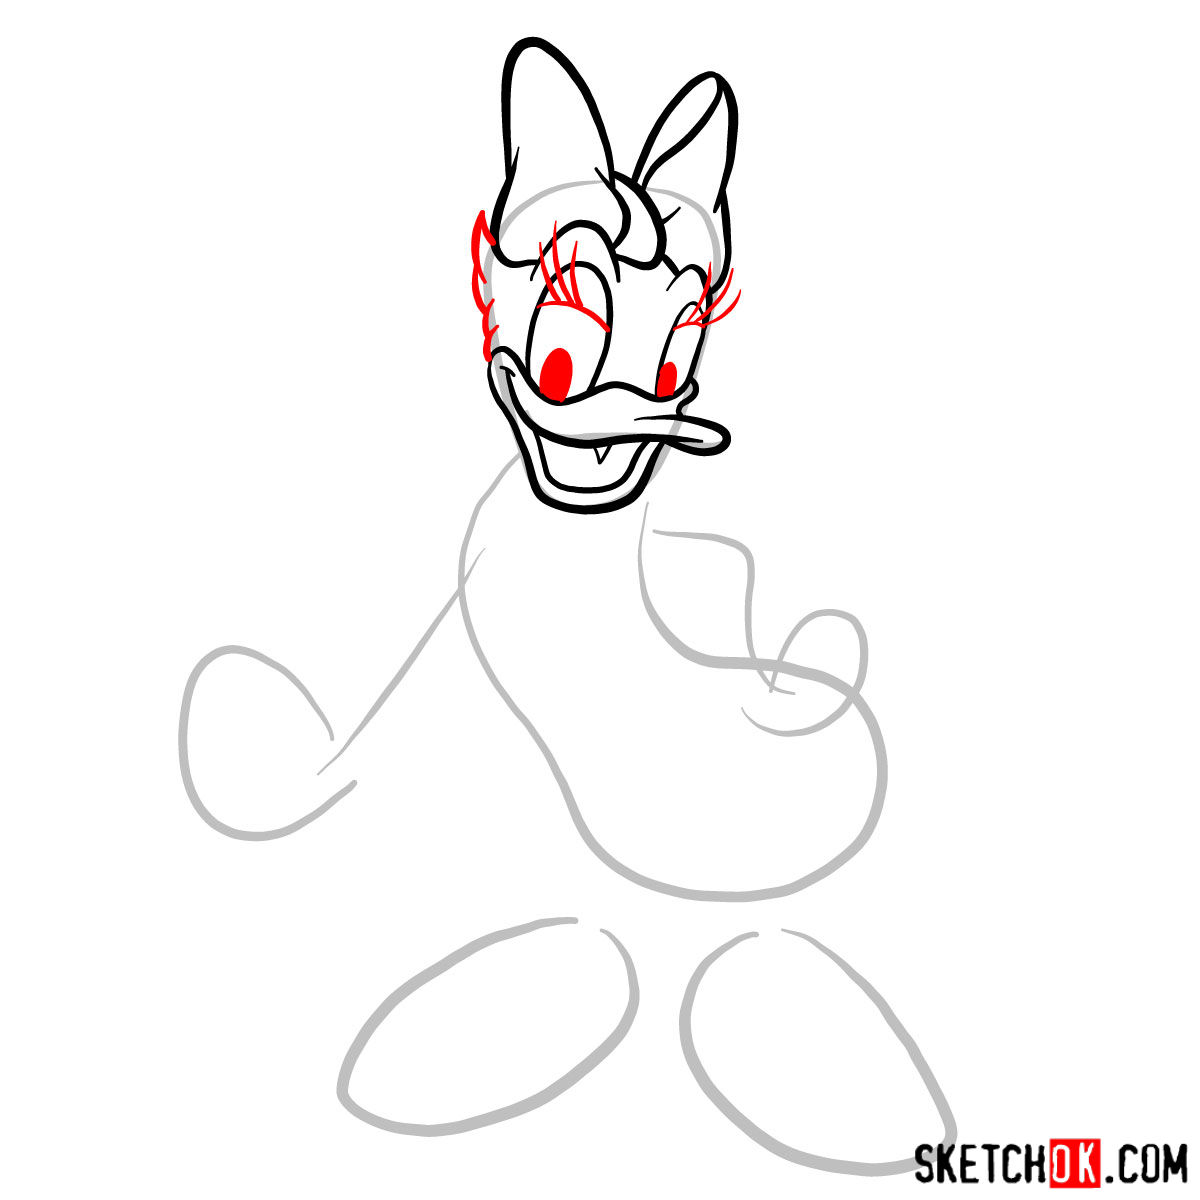 How to draw Daisy Duck - step 04